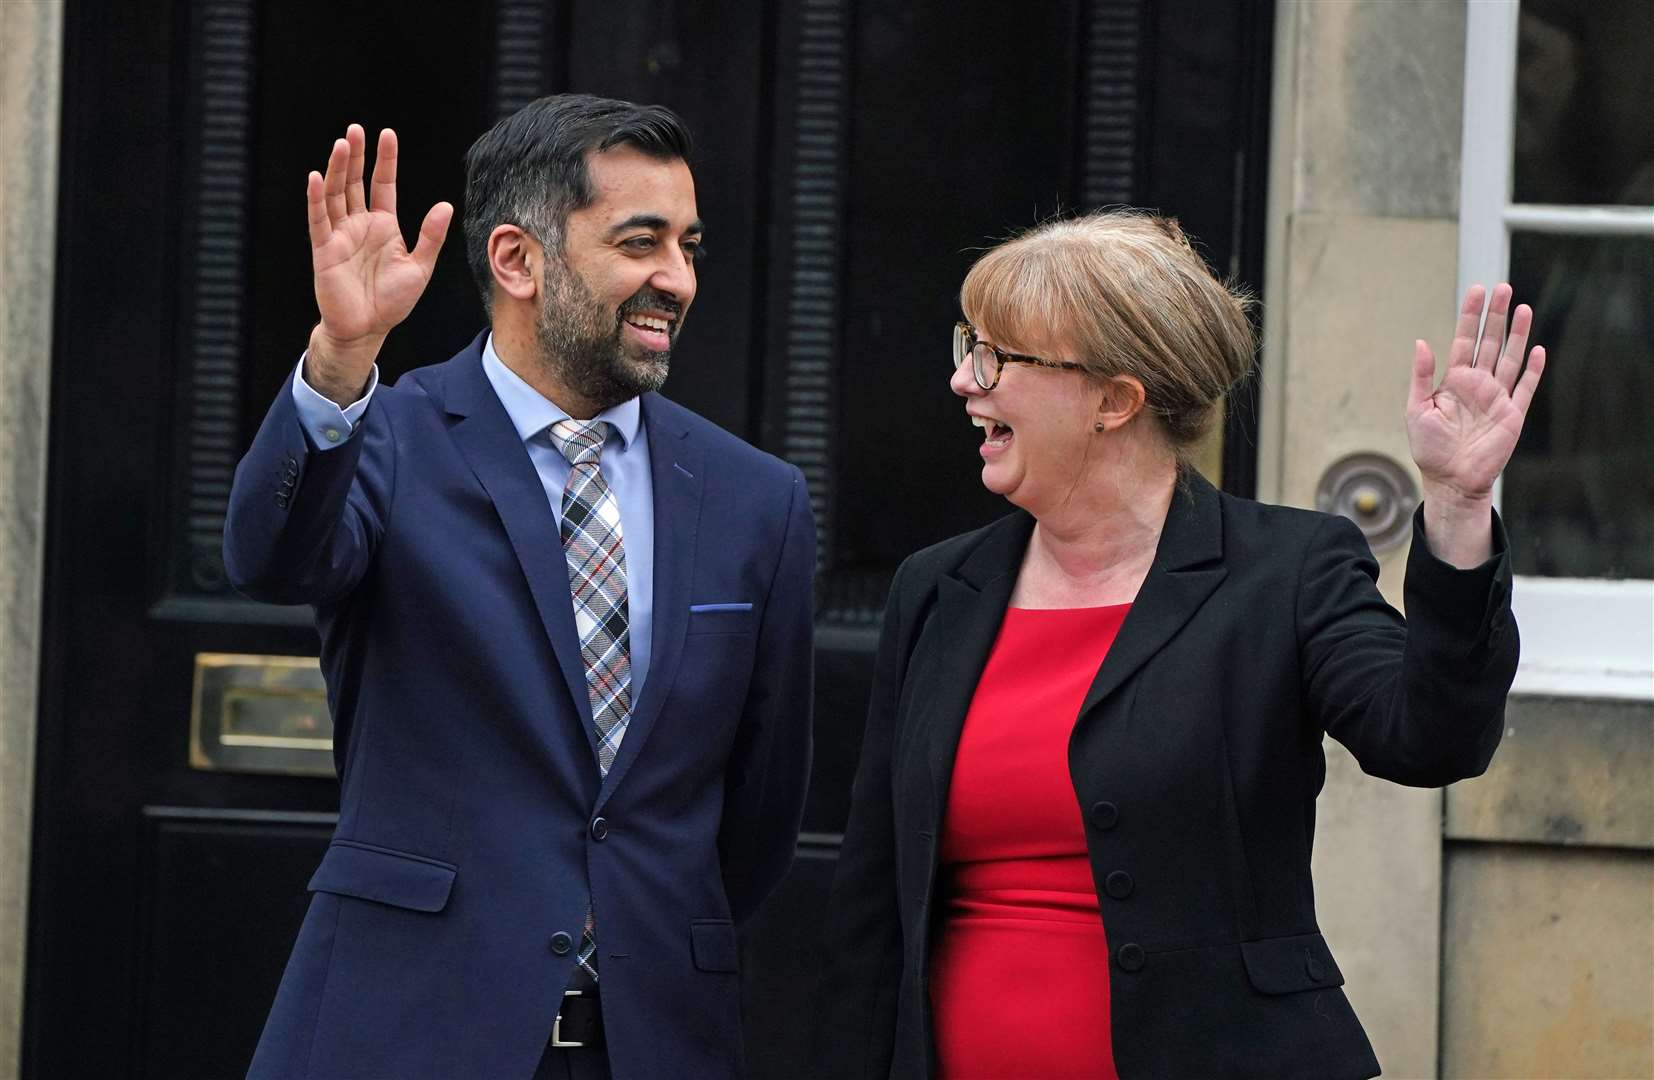 Humza Yousaf and Shona Robison on the steps of Bute House after their first Cabinet meeting (Andrew Milligan/PA)